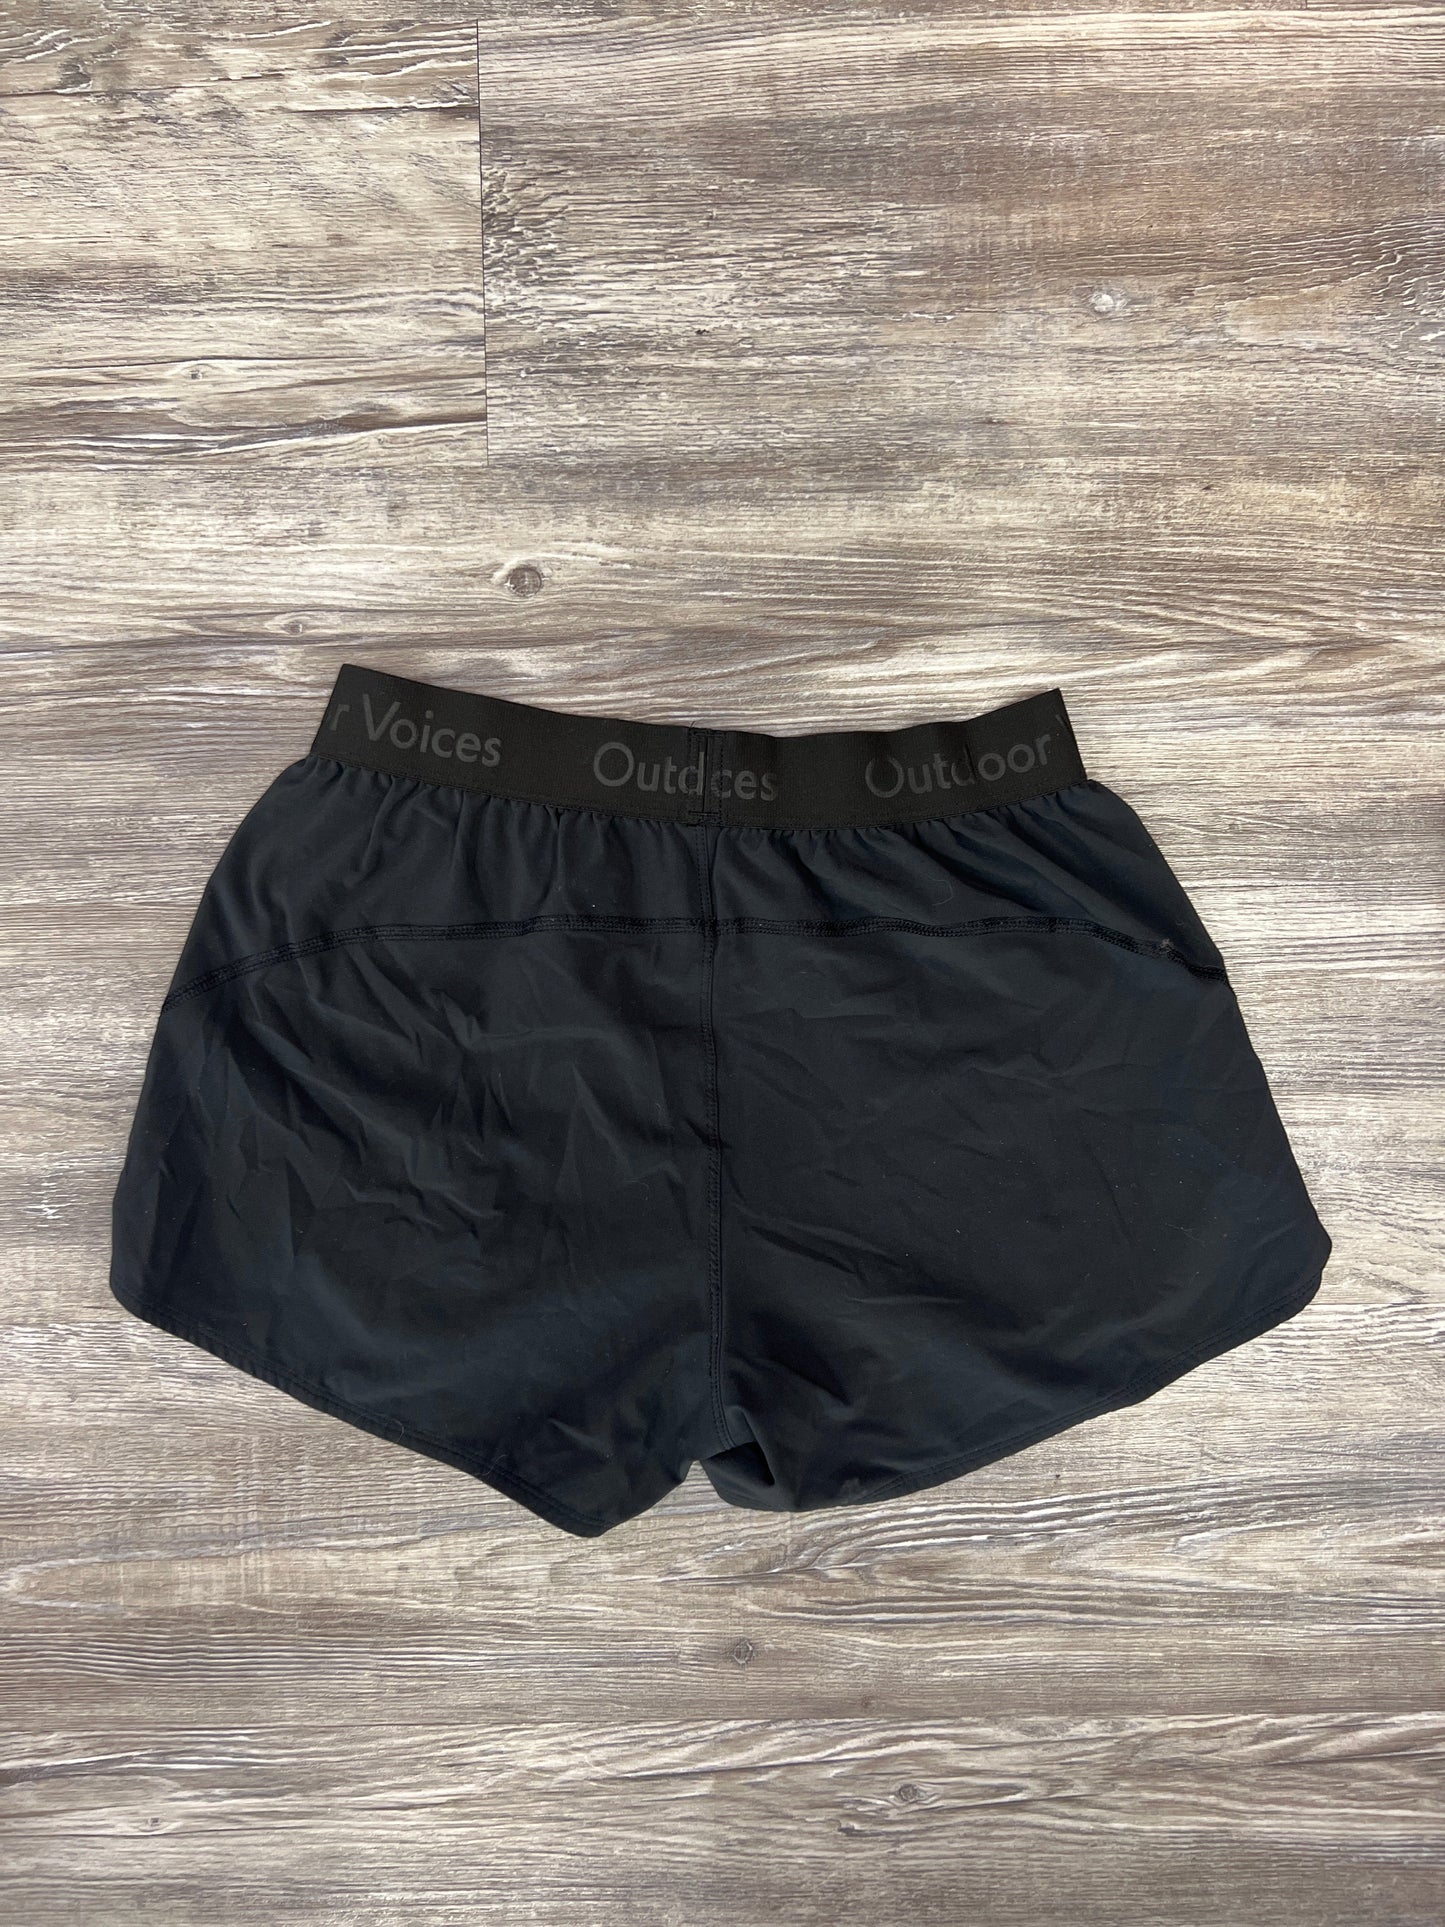 Athletic Shorts By Outdoor Voices  Size: S